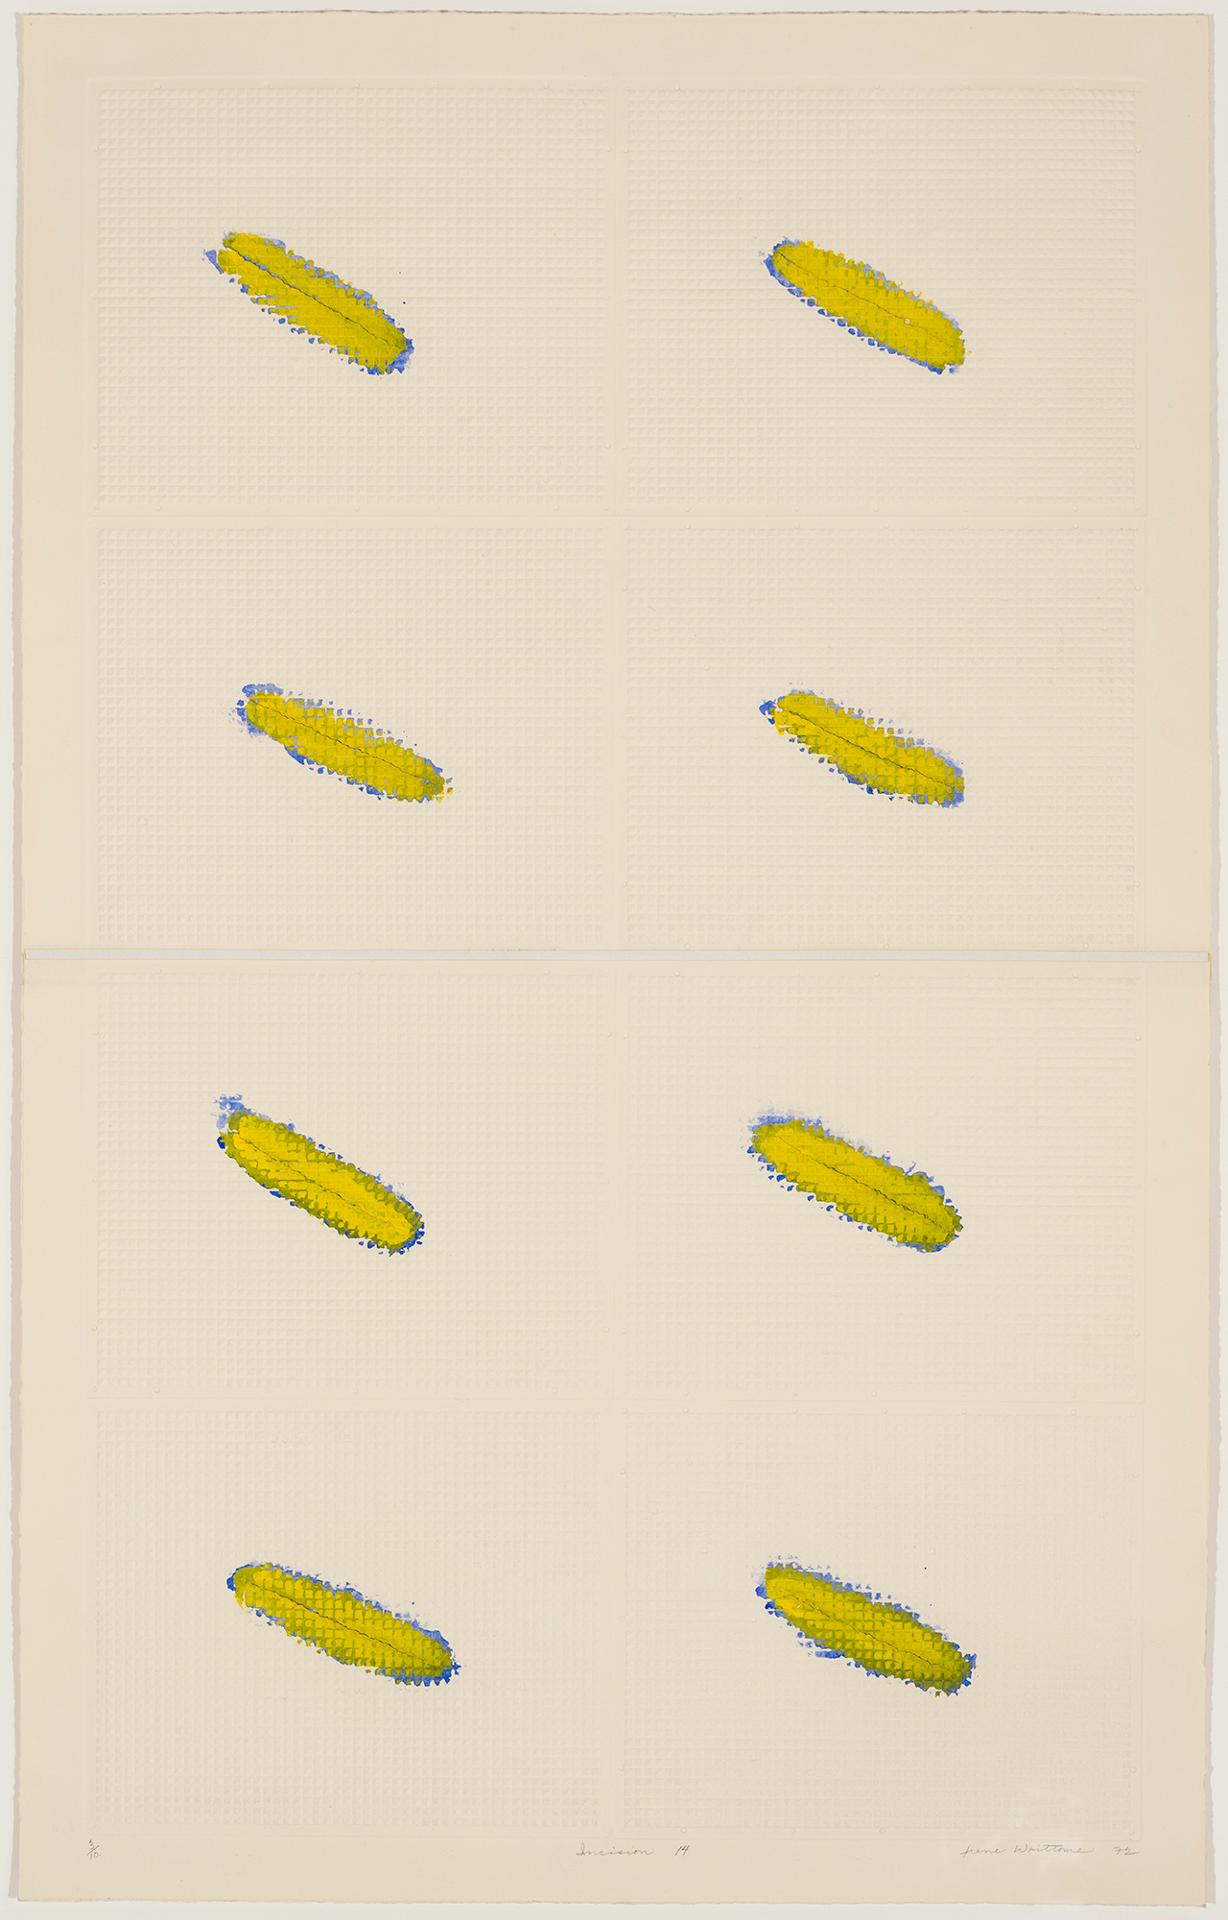 Irene F. Whittome (1942) - Incisions no. 14, 1972